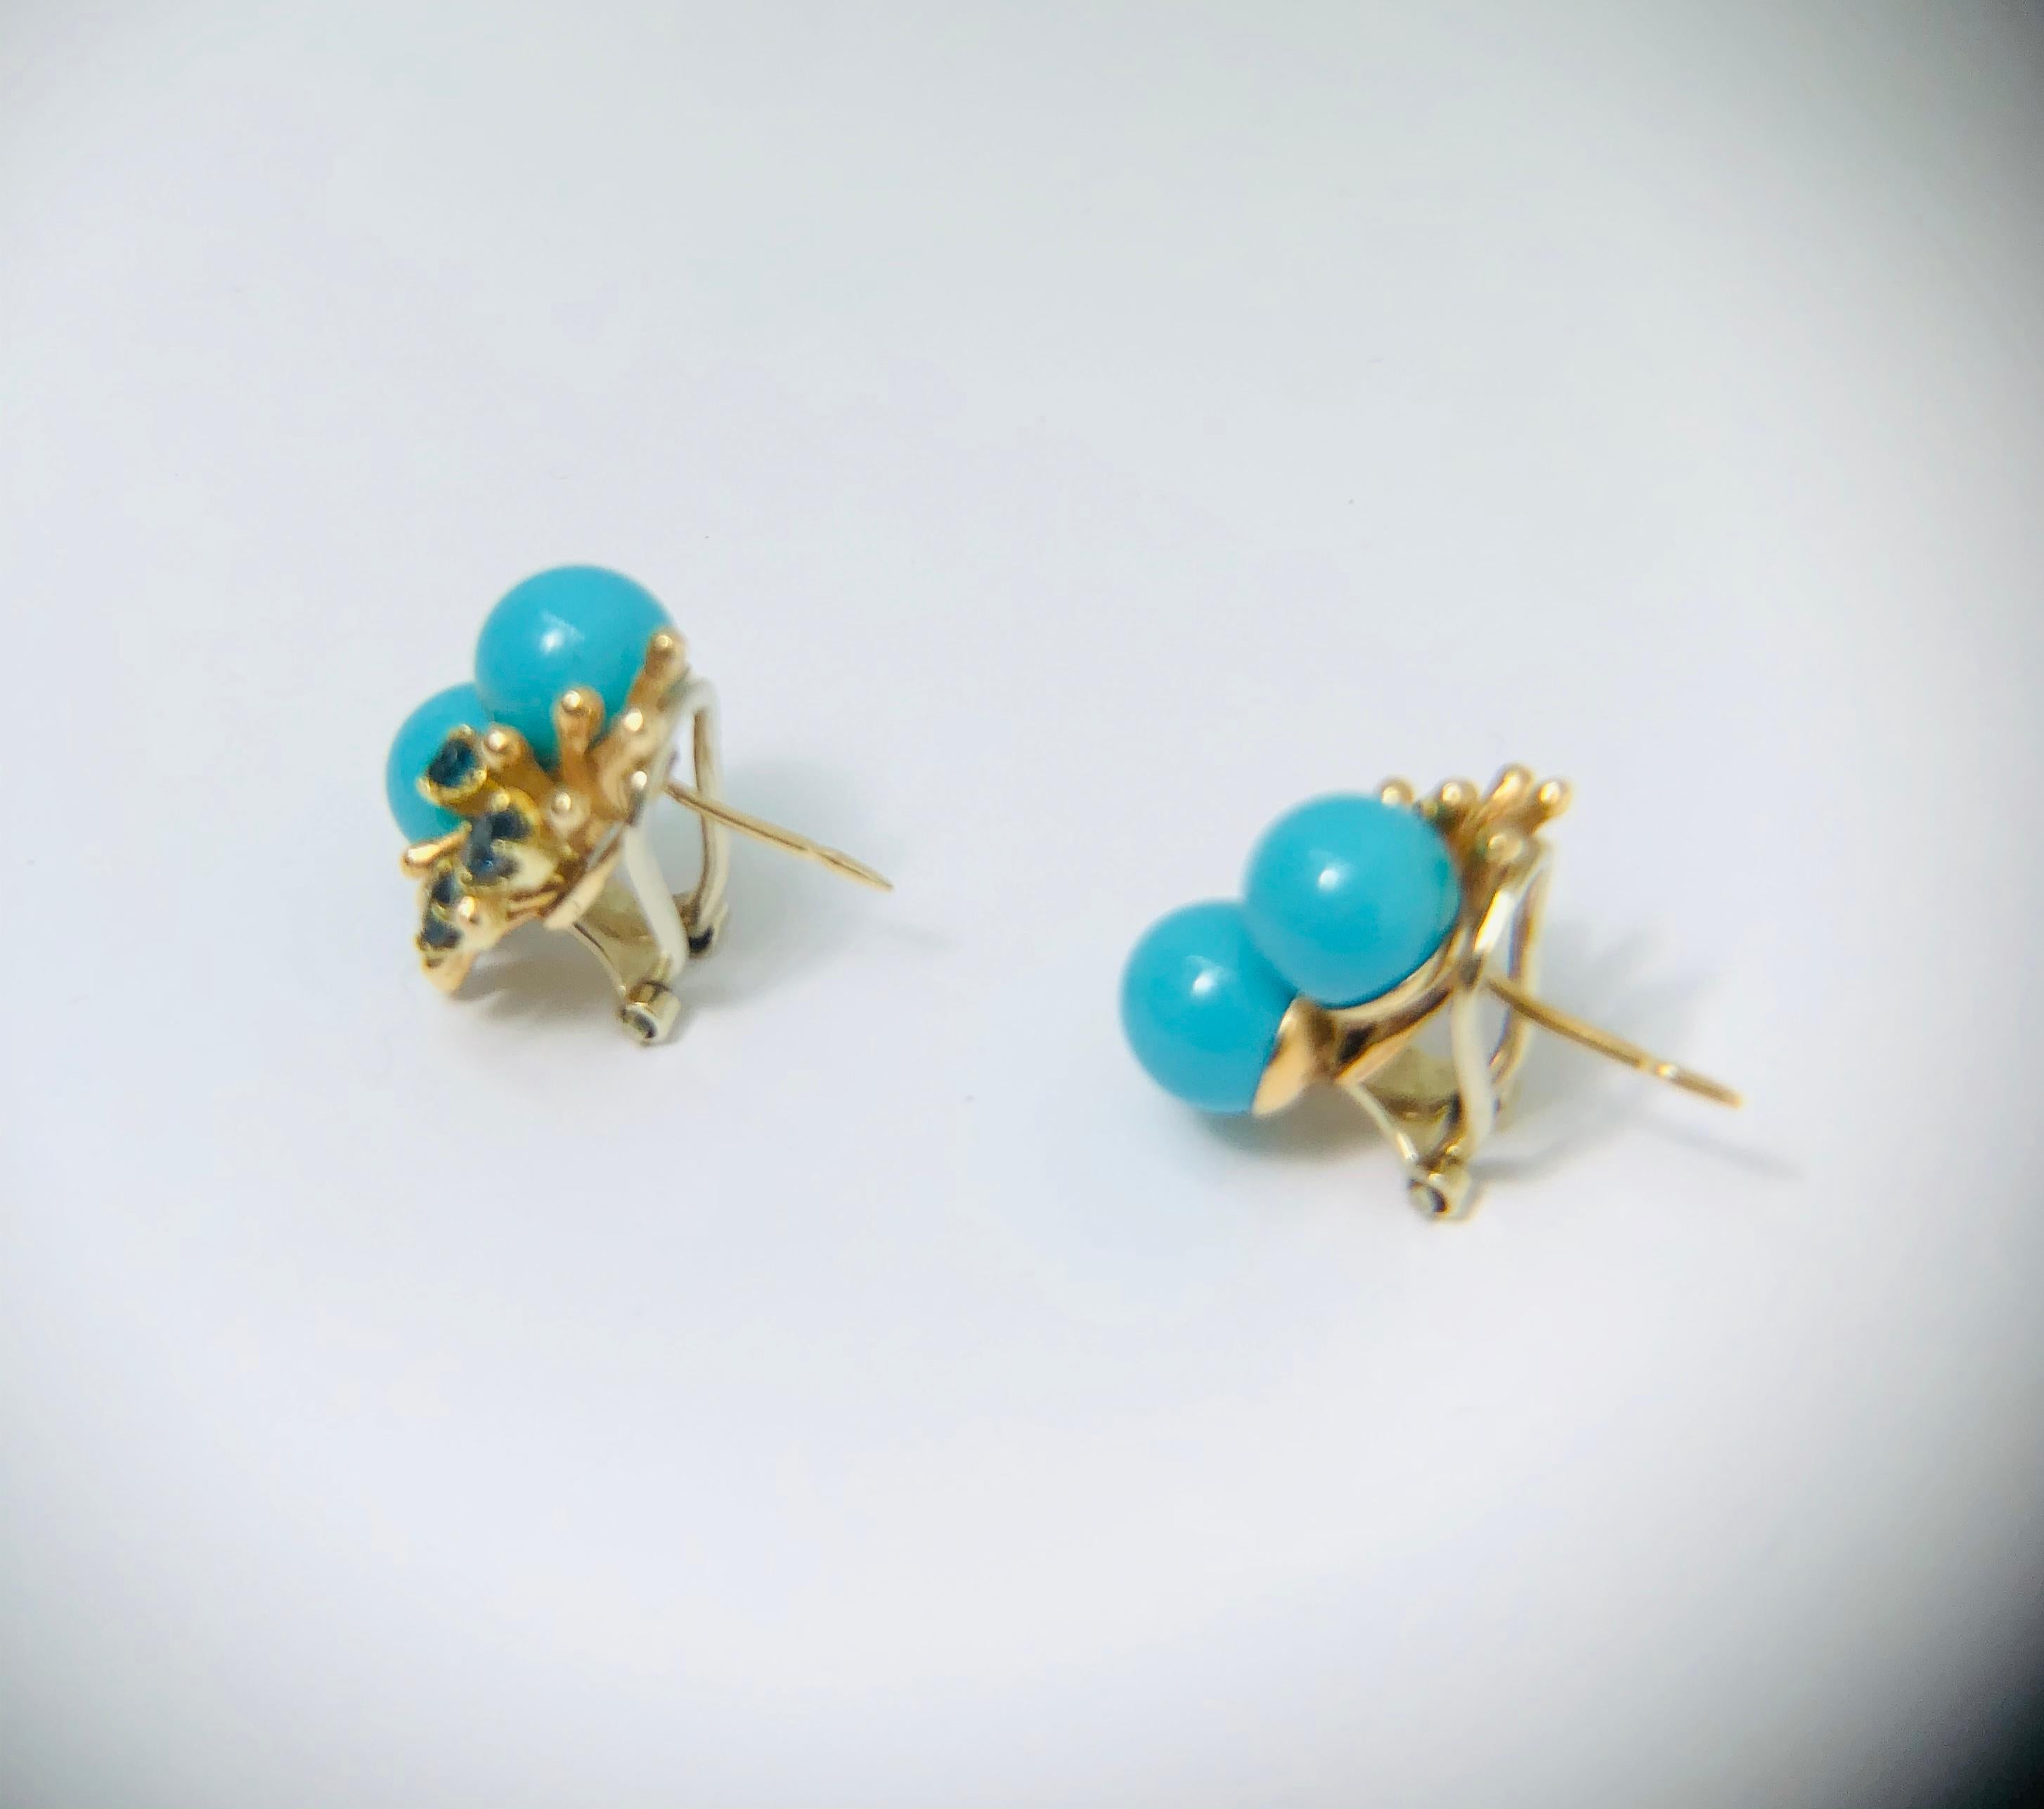 Ball Cut Turquoise and Sapphire Earrings, 14 Carat Yellow Gold